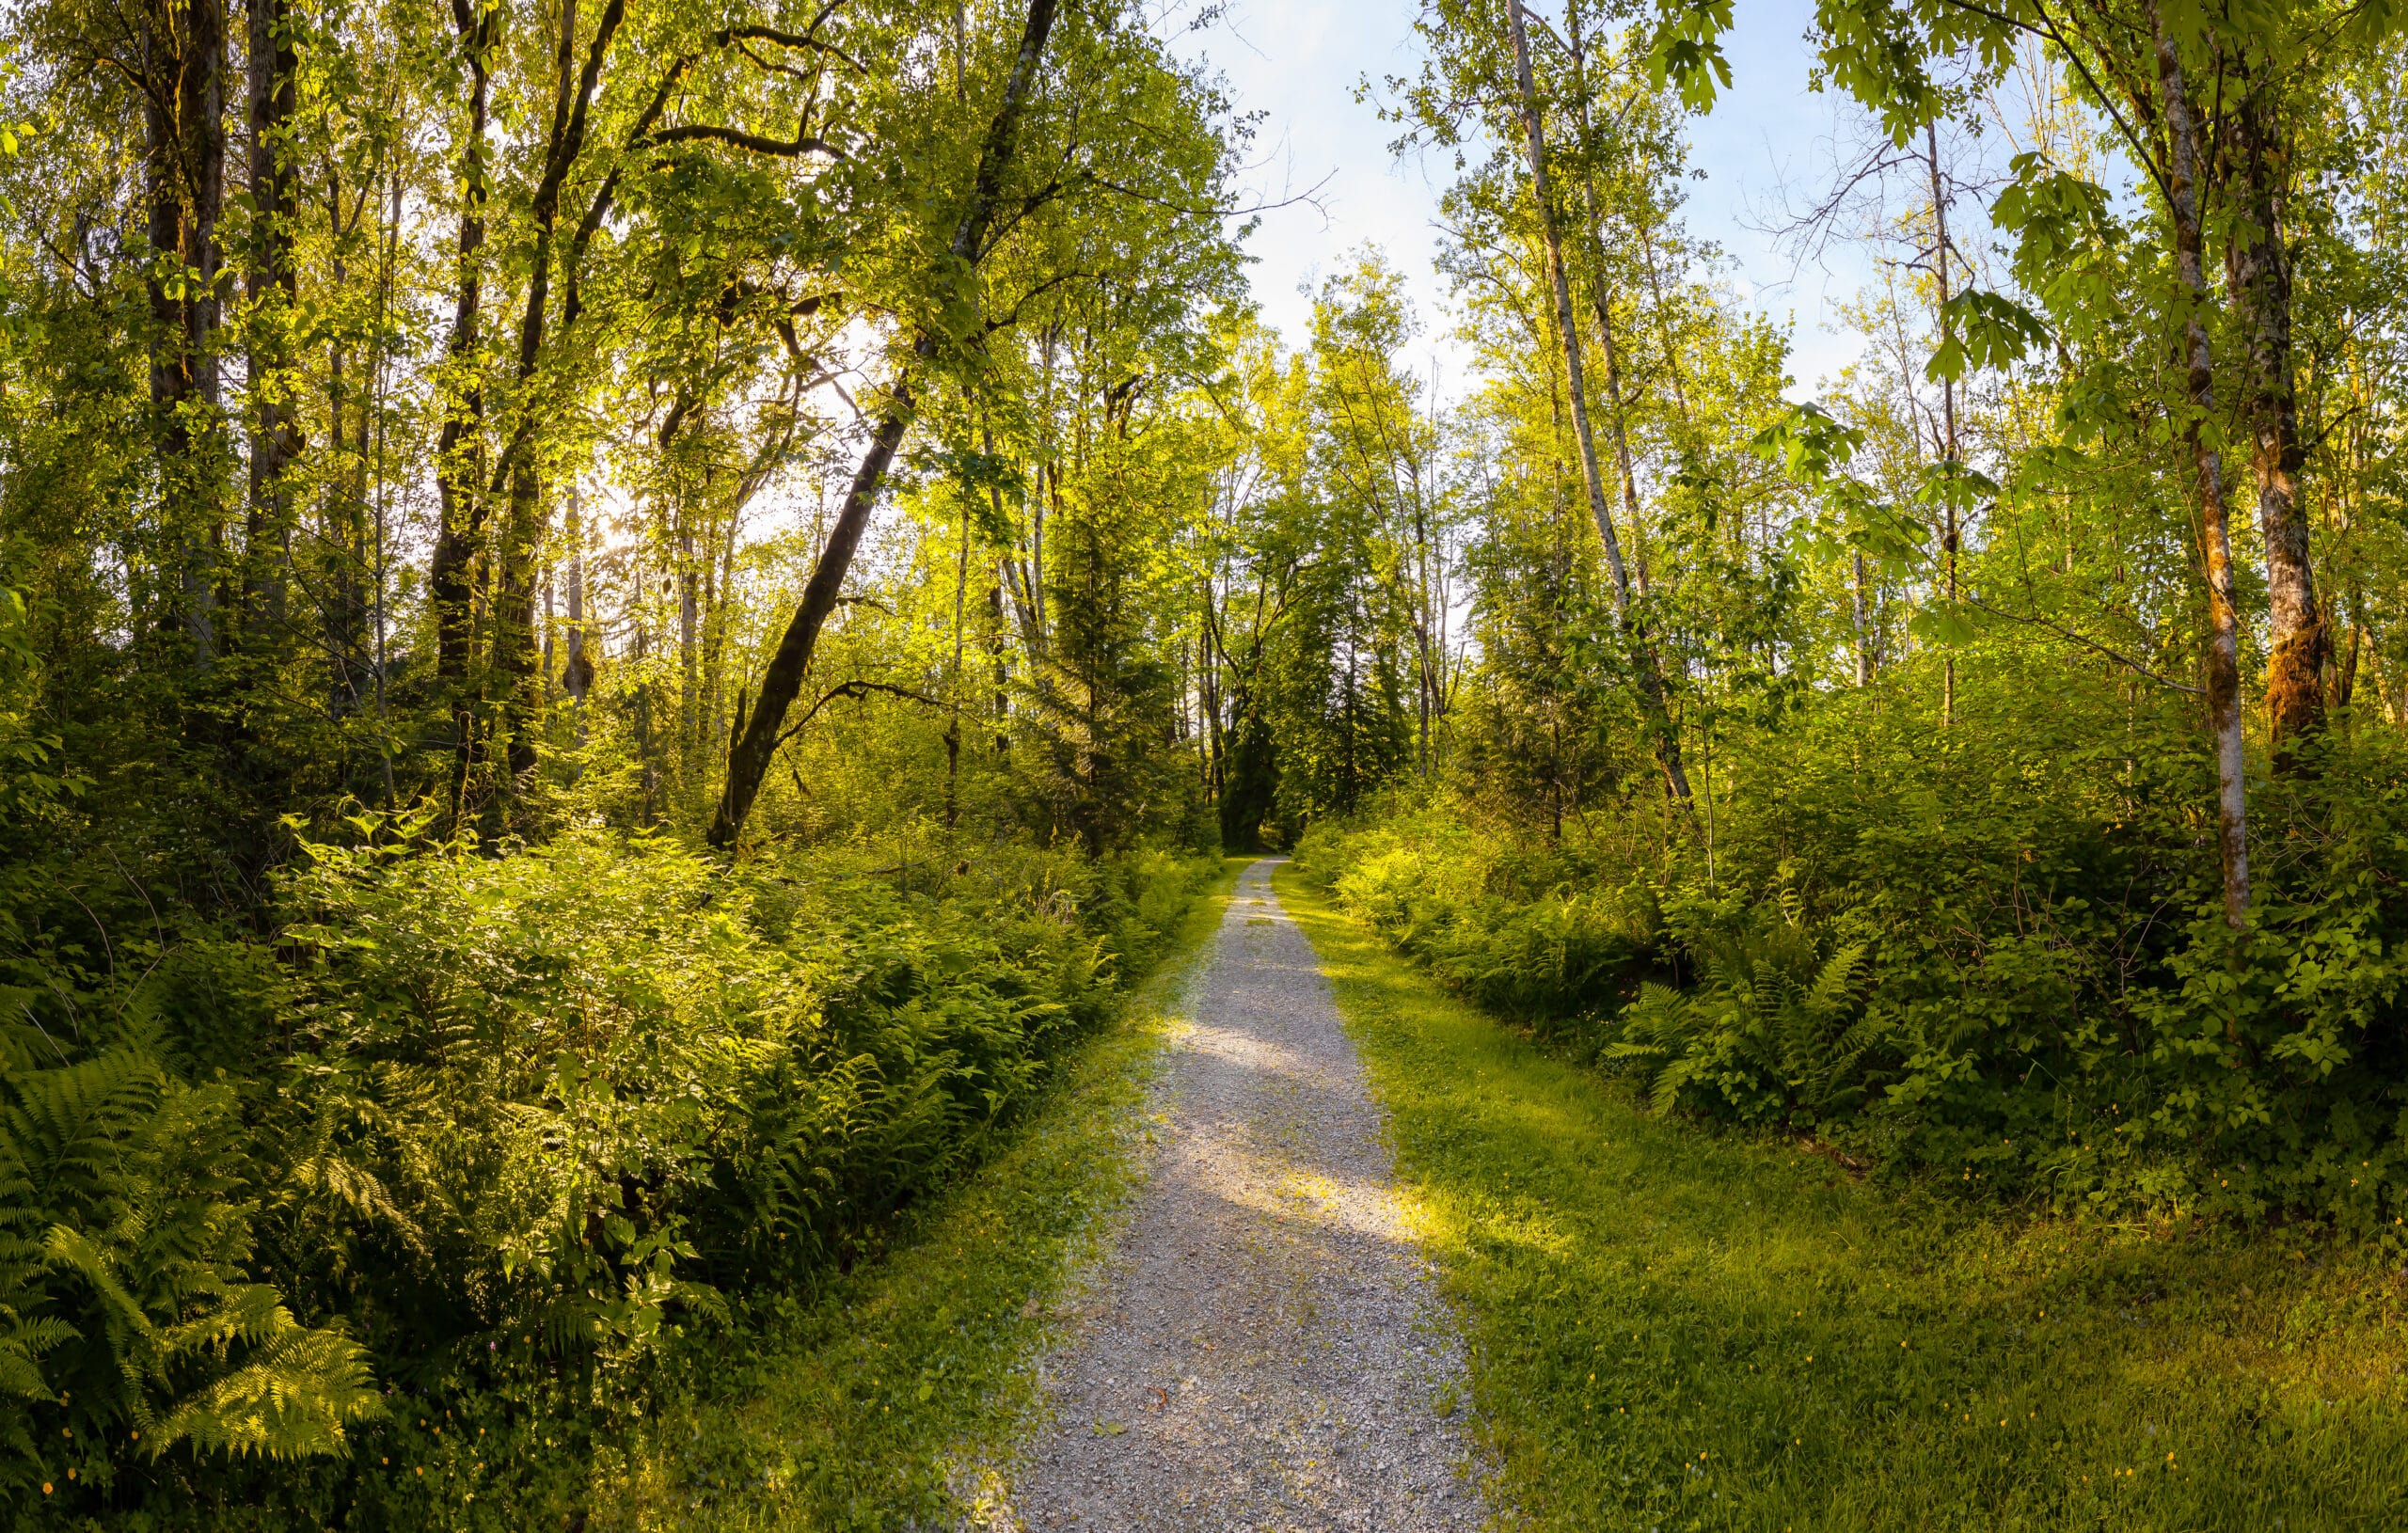 A dirt path in the middle of a lush green forest.